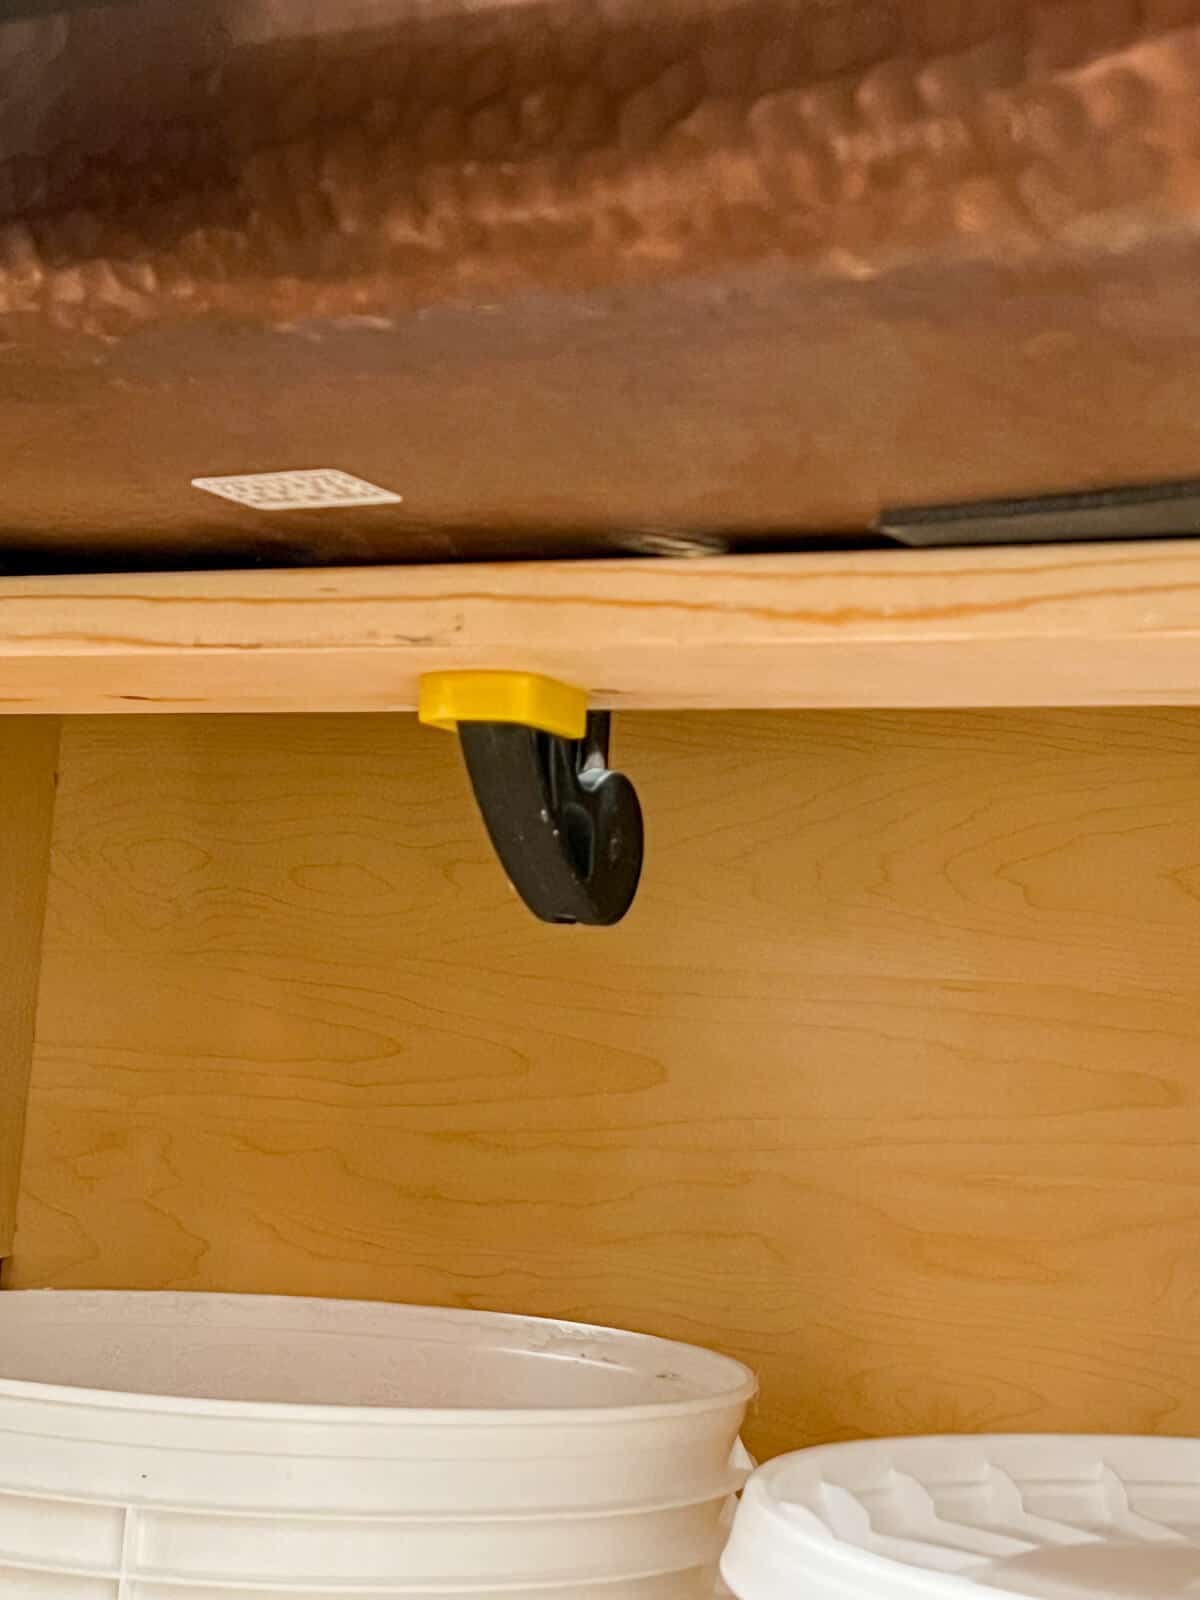 Clamping an undermount sink to granite counter tops.